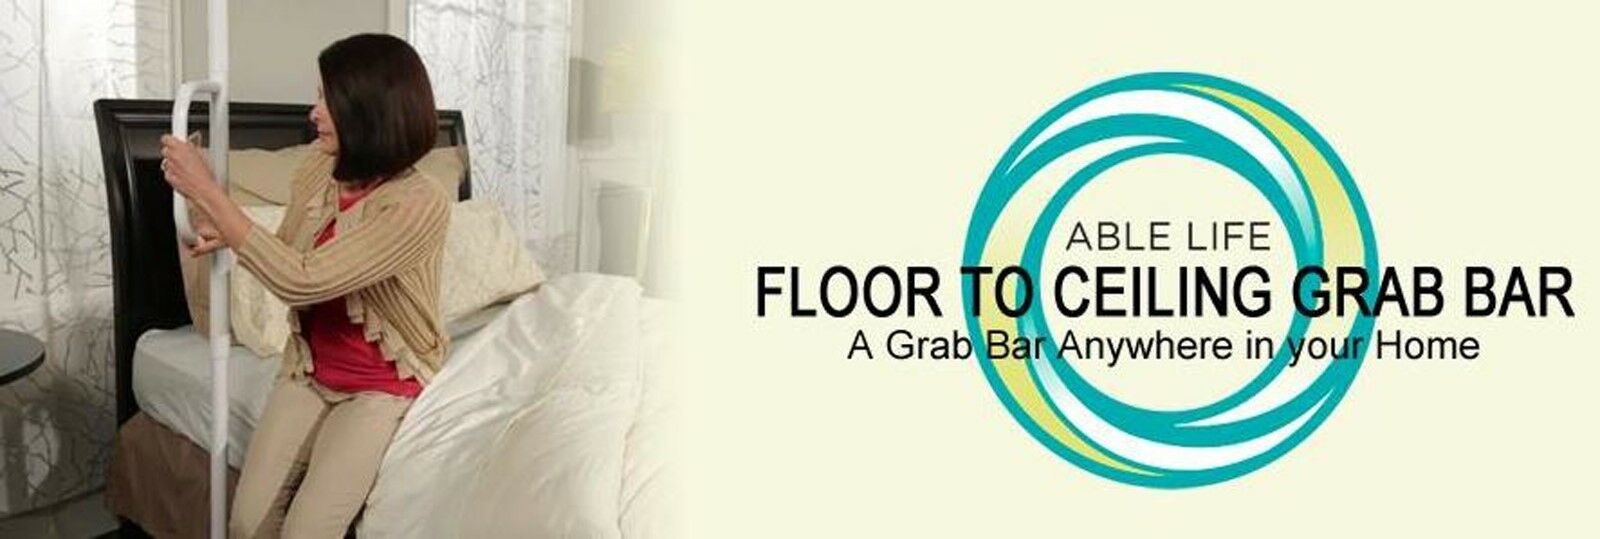 Able Life Universal Floor to Ceiling Grab Bar - Tension Mounted